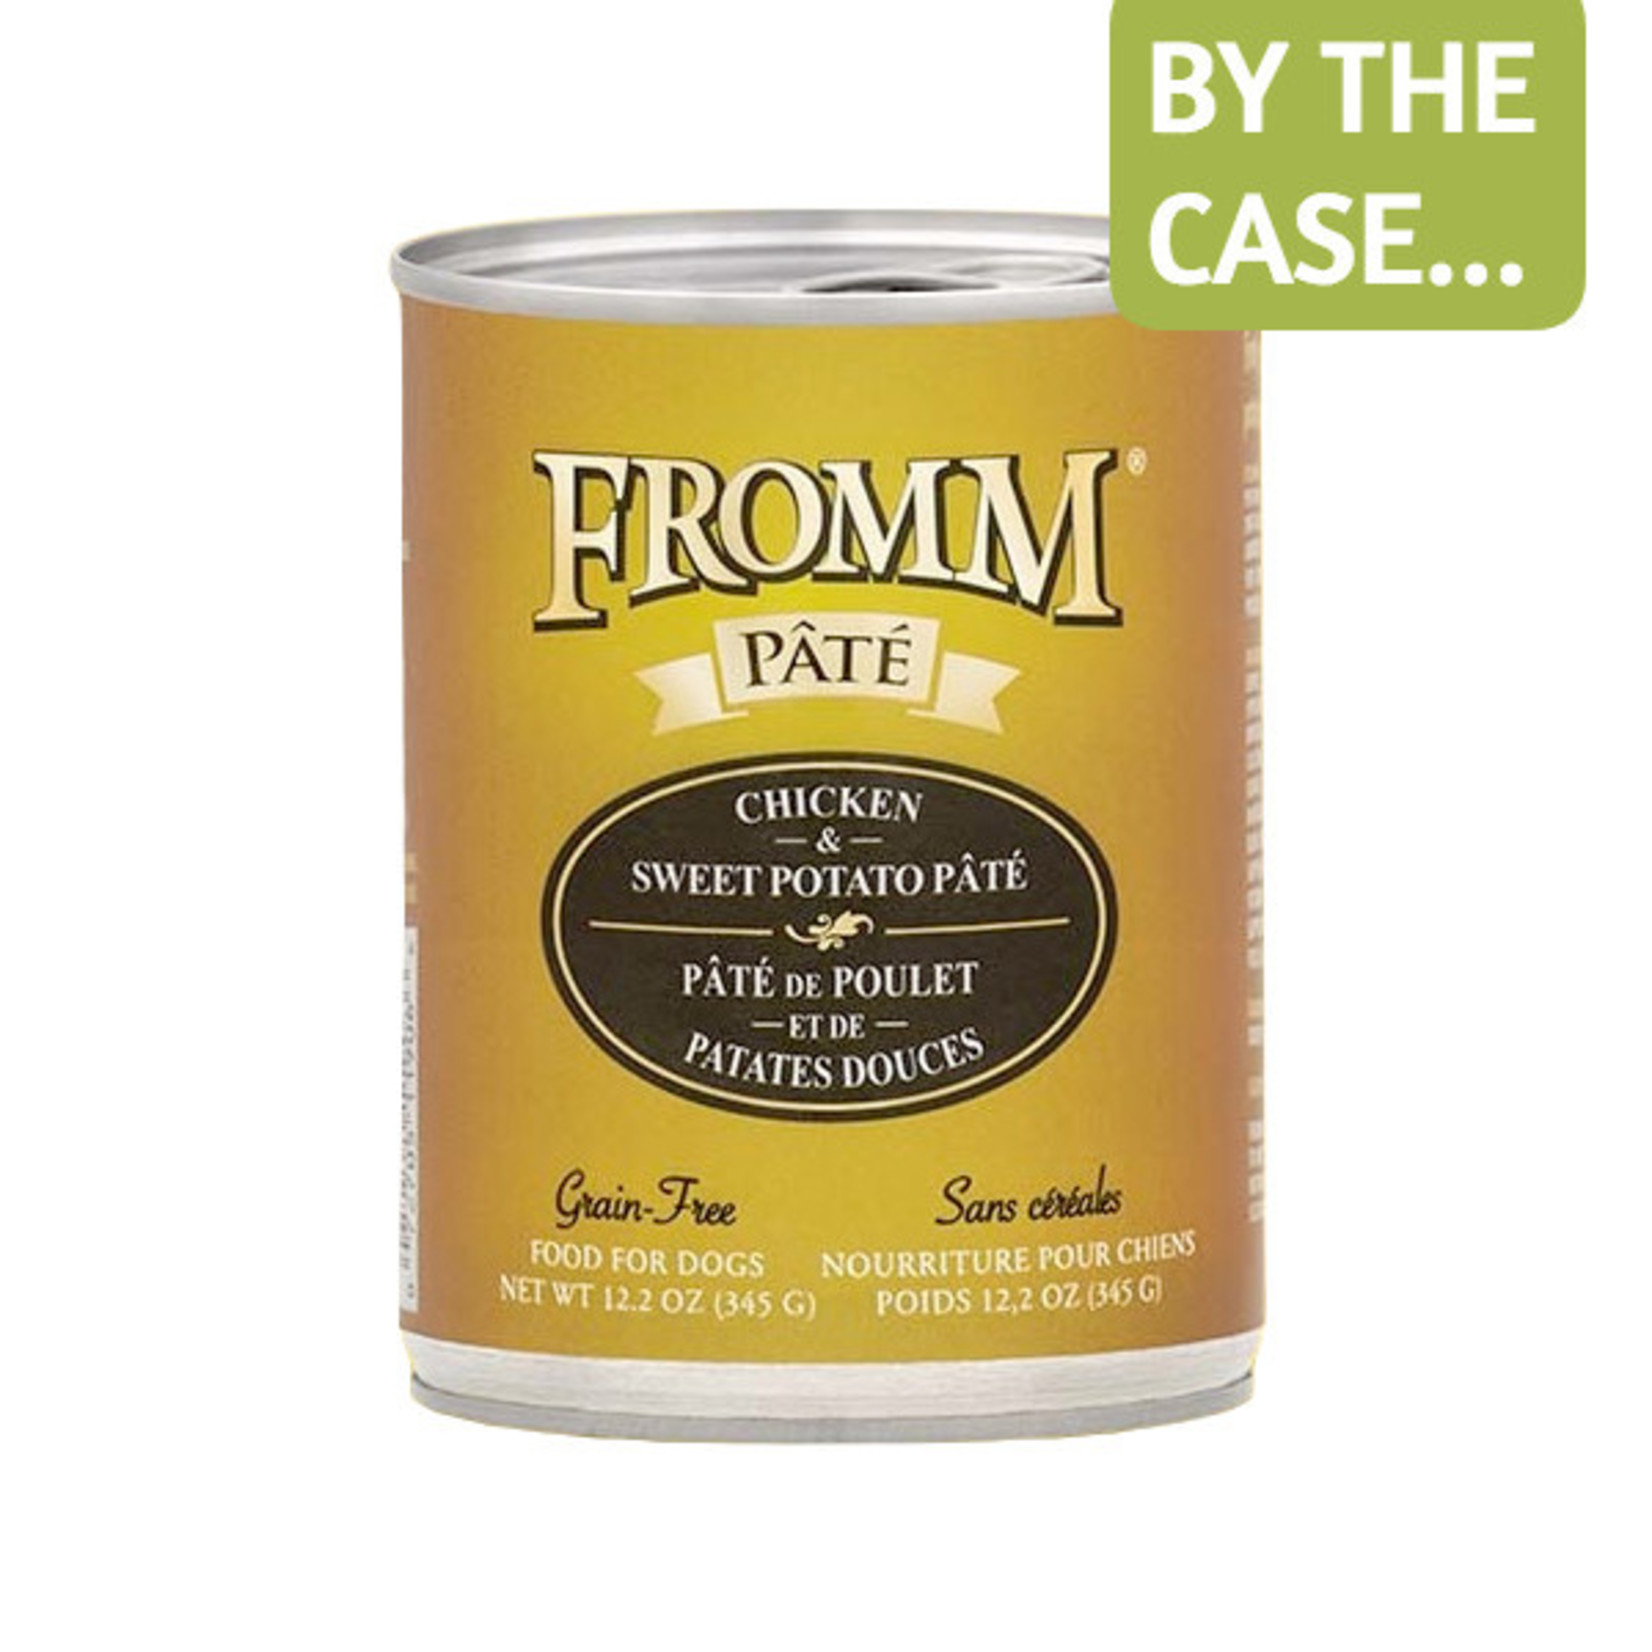 Fromm Fromm Wet Dog Food Chicken & Sweet Potato Pate 12.2oz Can Grain Free